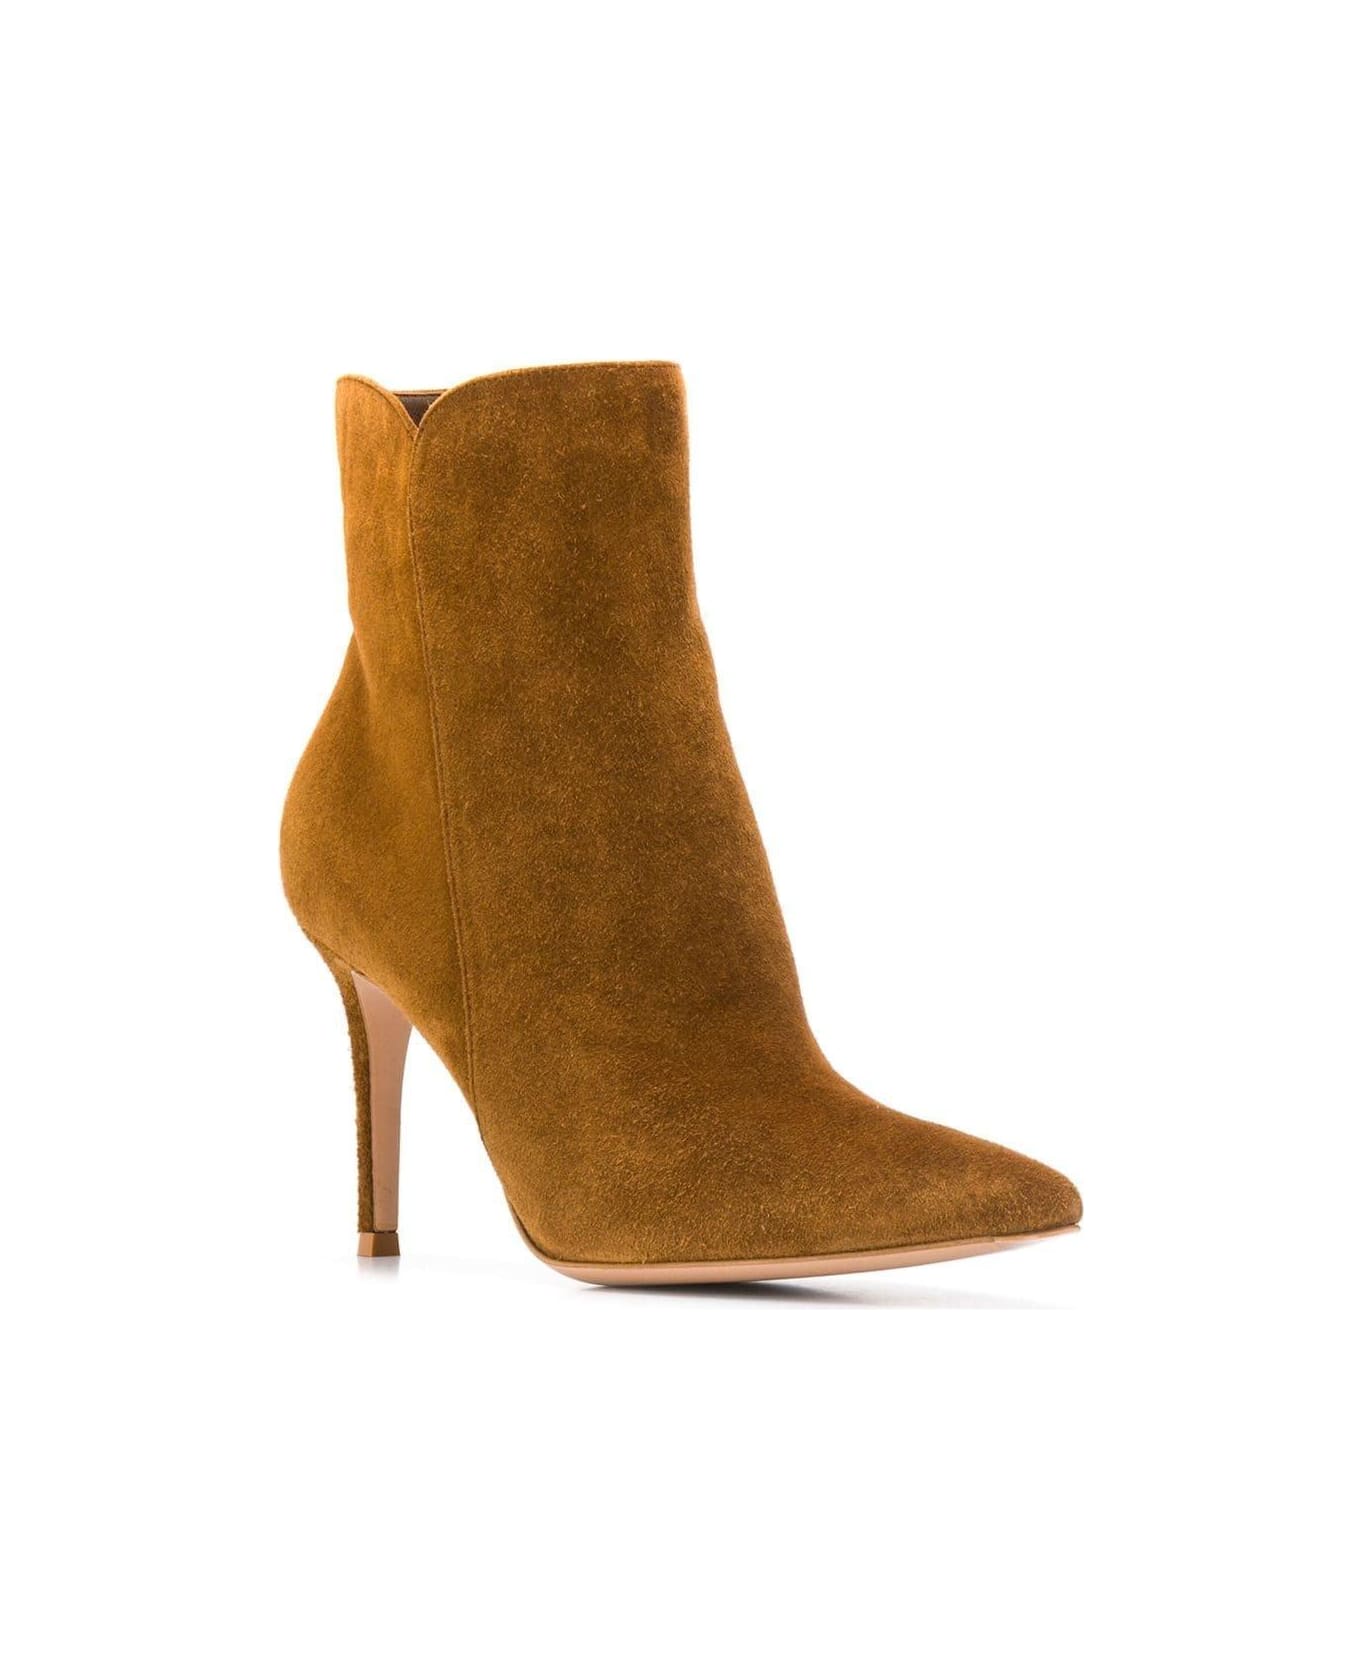 Gianvito Rossi Levy Ankle Boots ブーツ